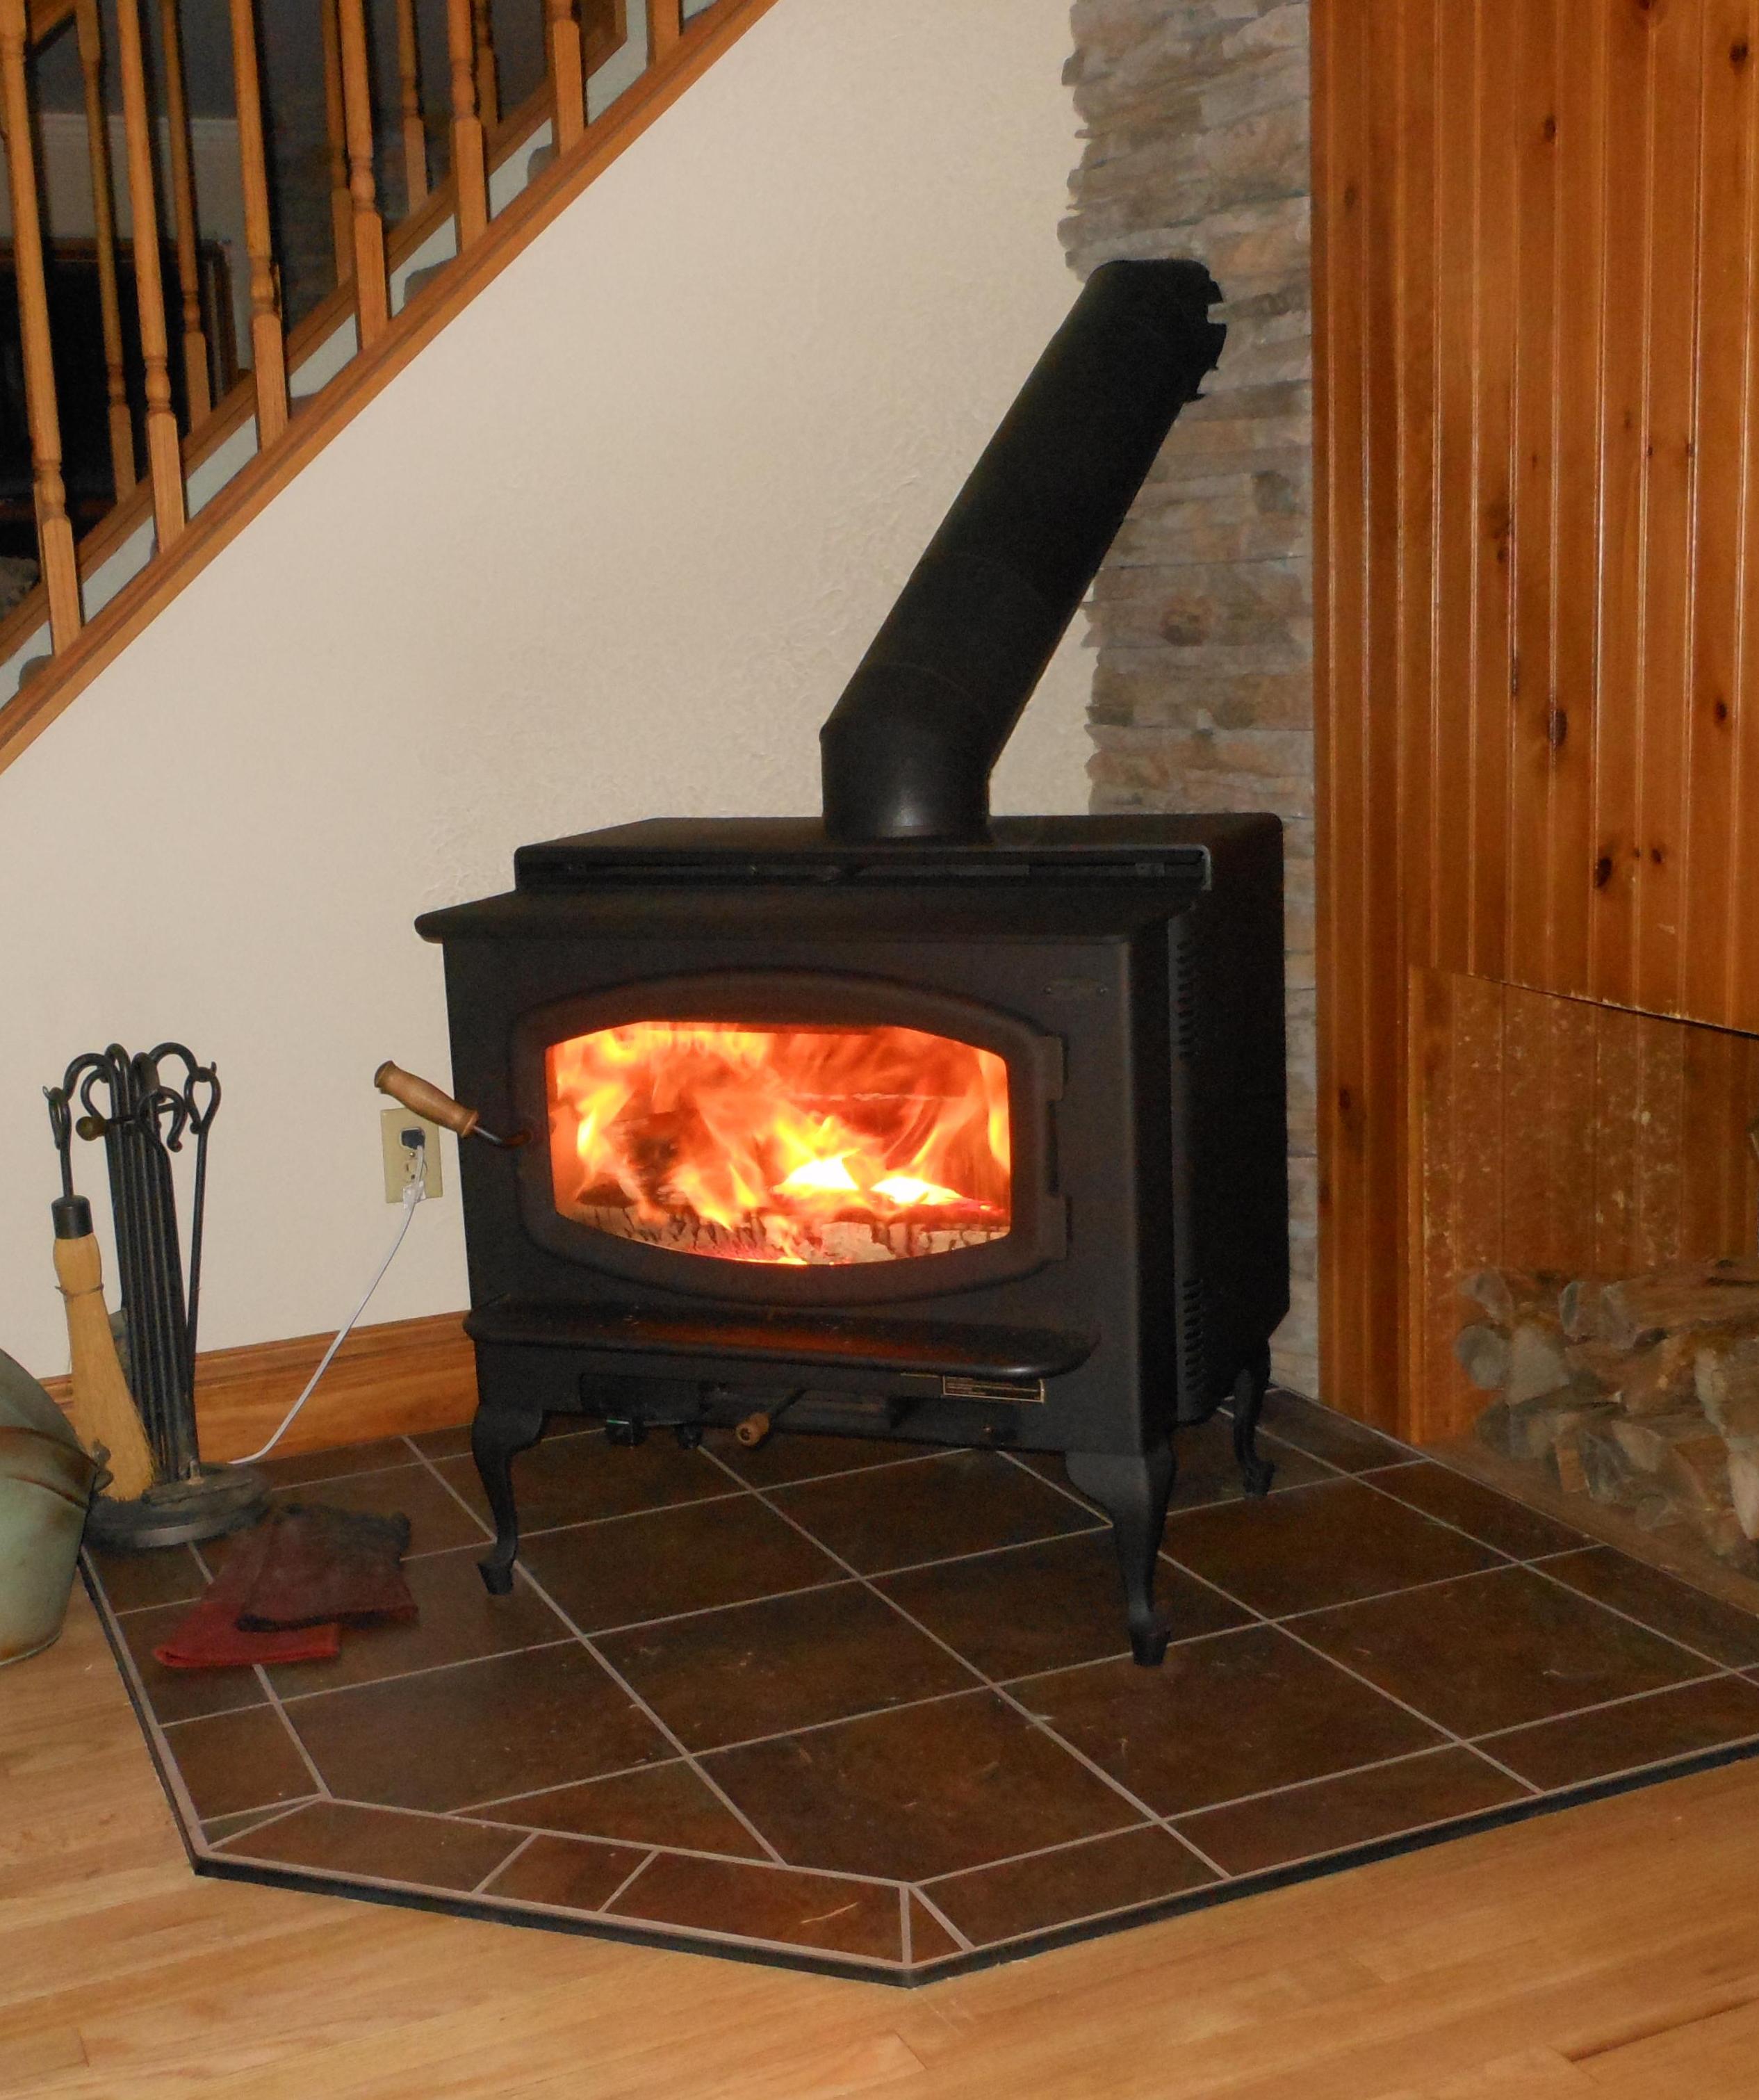 http://www.mainepelletstove.com/wp-content/uploads/2016/01/Avalon-Olympic-woodstove.jpg